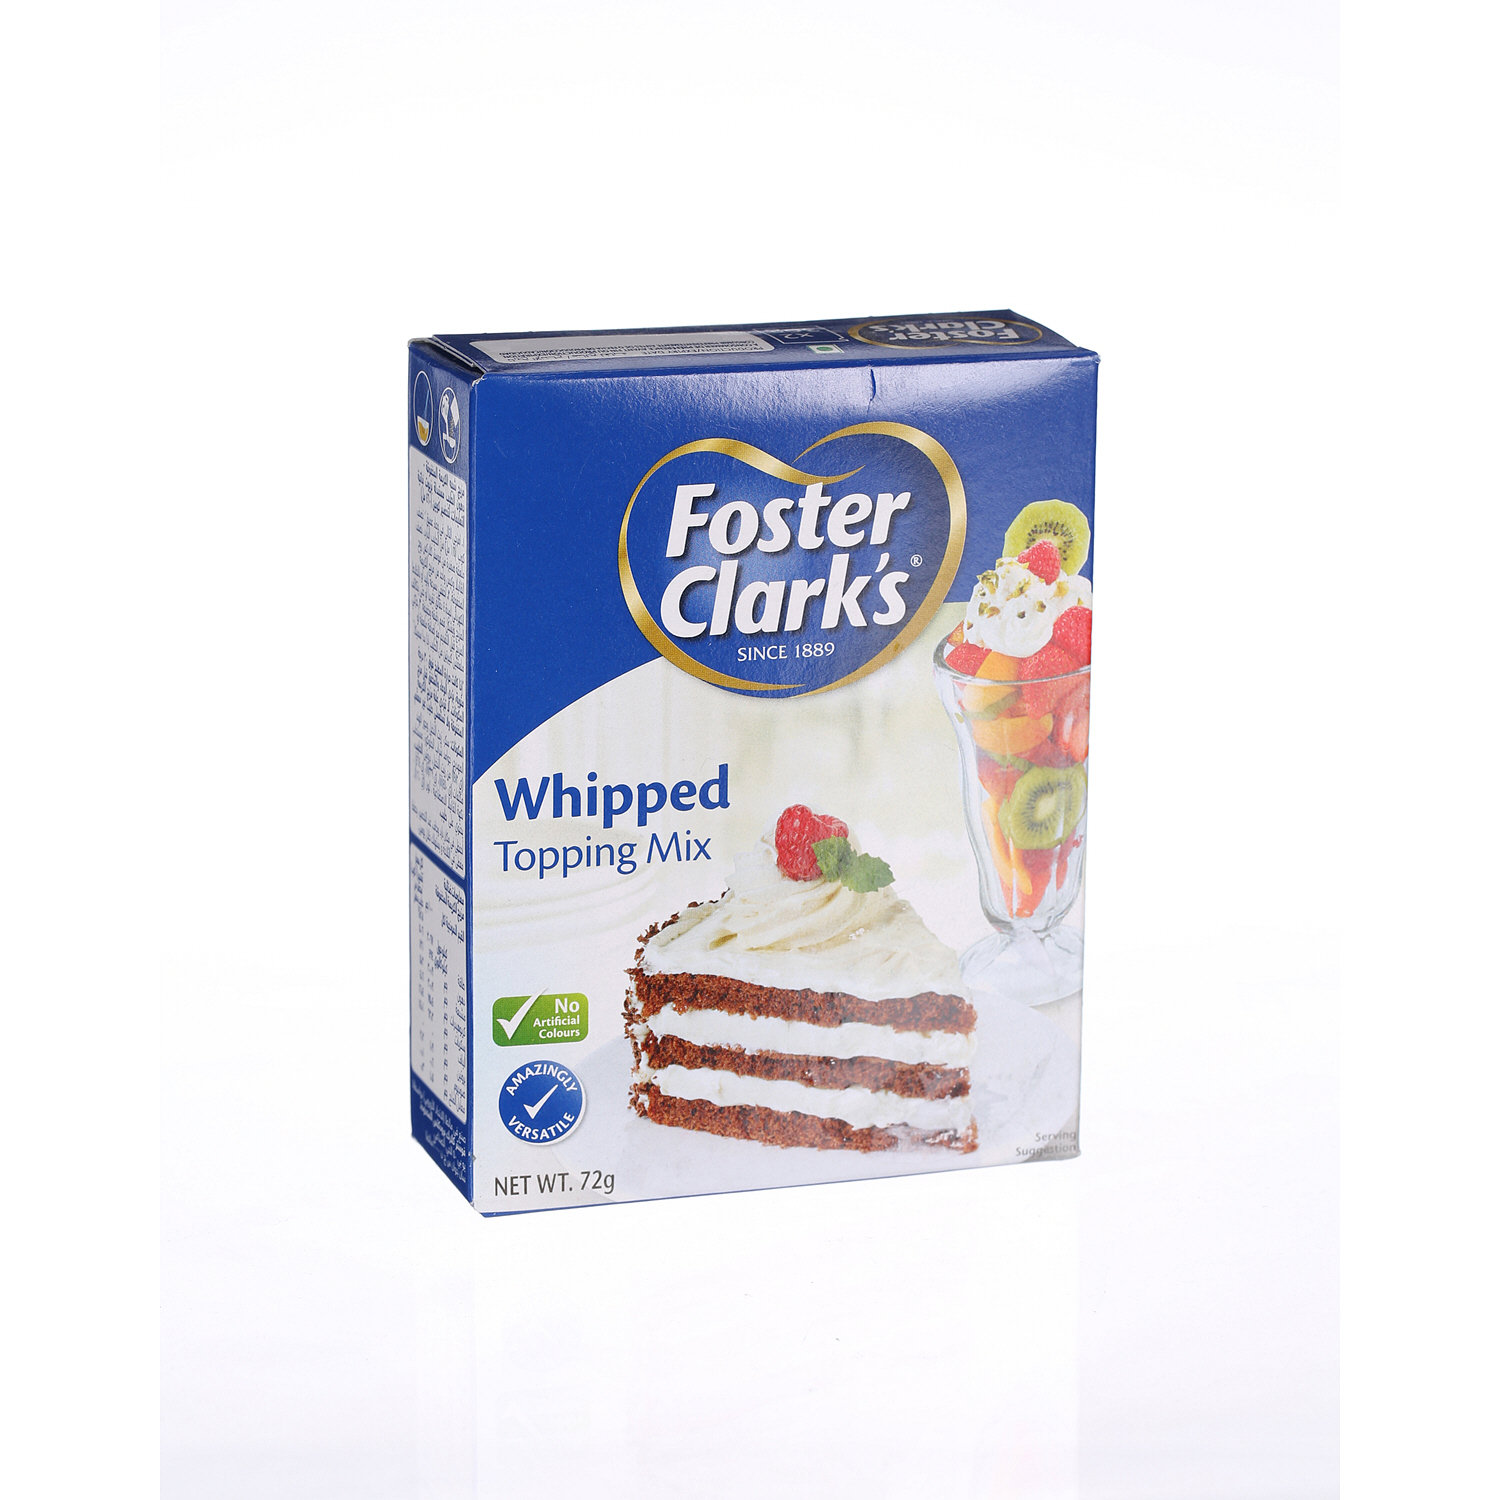 Foster Clarks Whipped Topping Mix 72gm